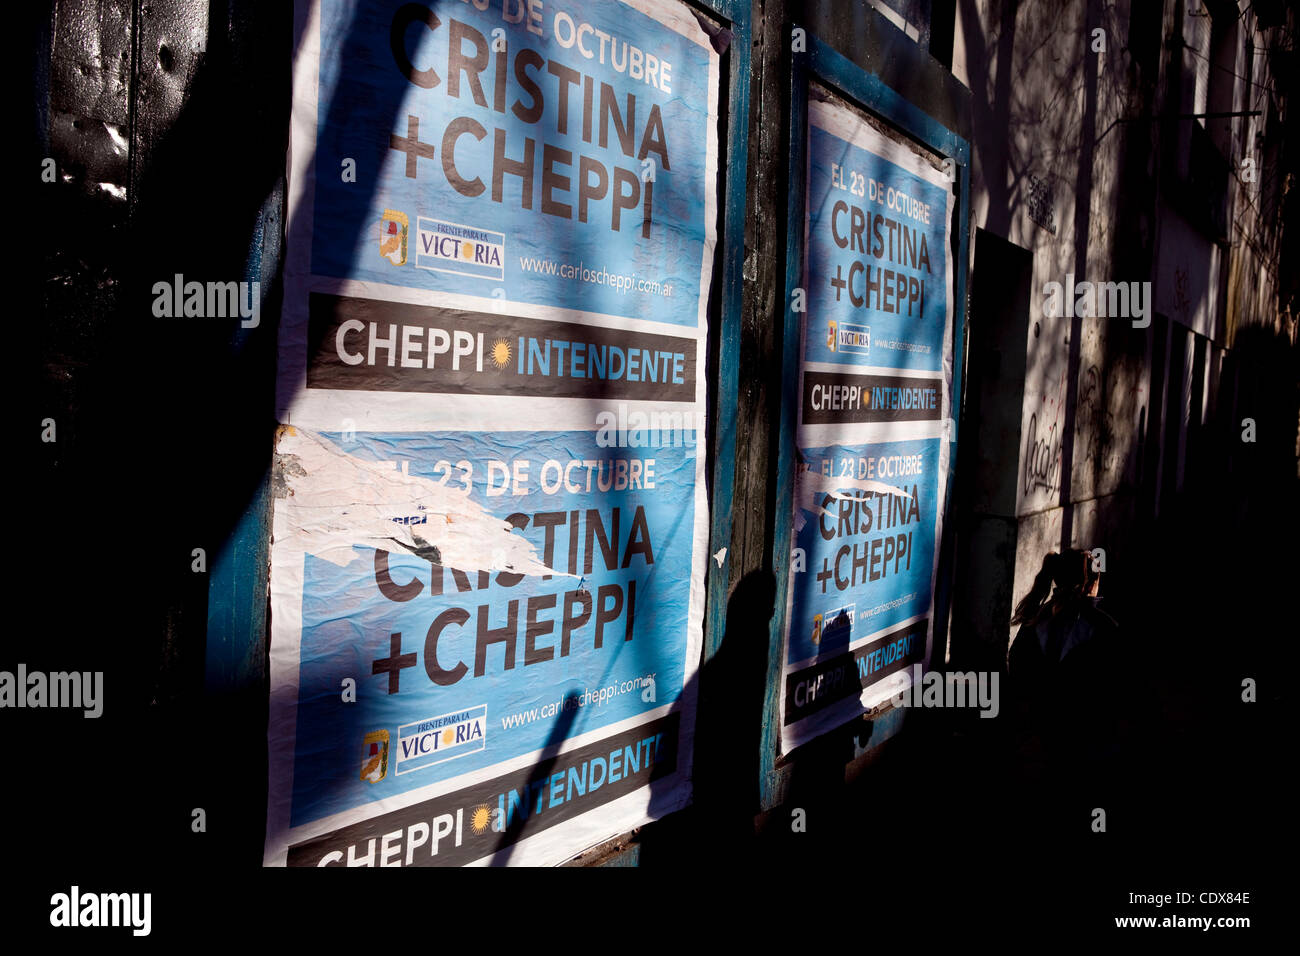 Oct 21, 2011; Mar del Plata, Buenos Aires, Argentina; A girl walks by a biilboard with Cristina Kirchner campaign posters. The political partys are wrapping up their campaigns ahead of Sunday's vote, with Kirchner considered a foregone conclusion to win. (Credit Image © Ryan Noble/ZUMA Press) Stock Photo